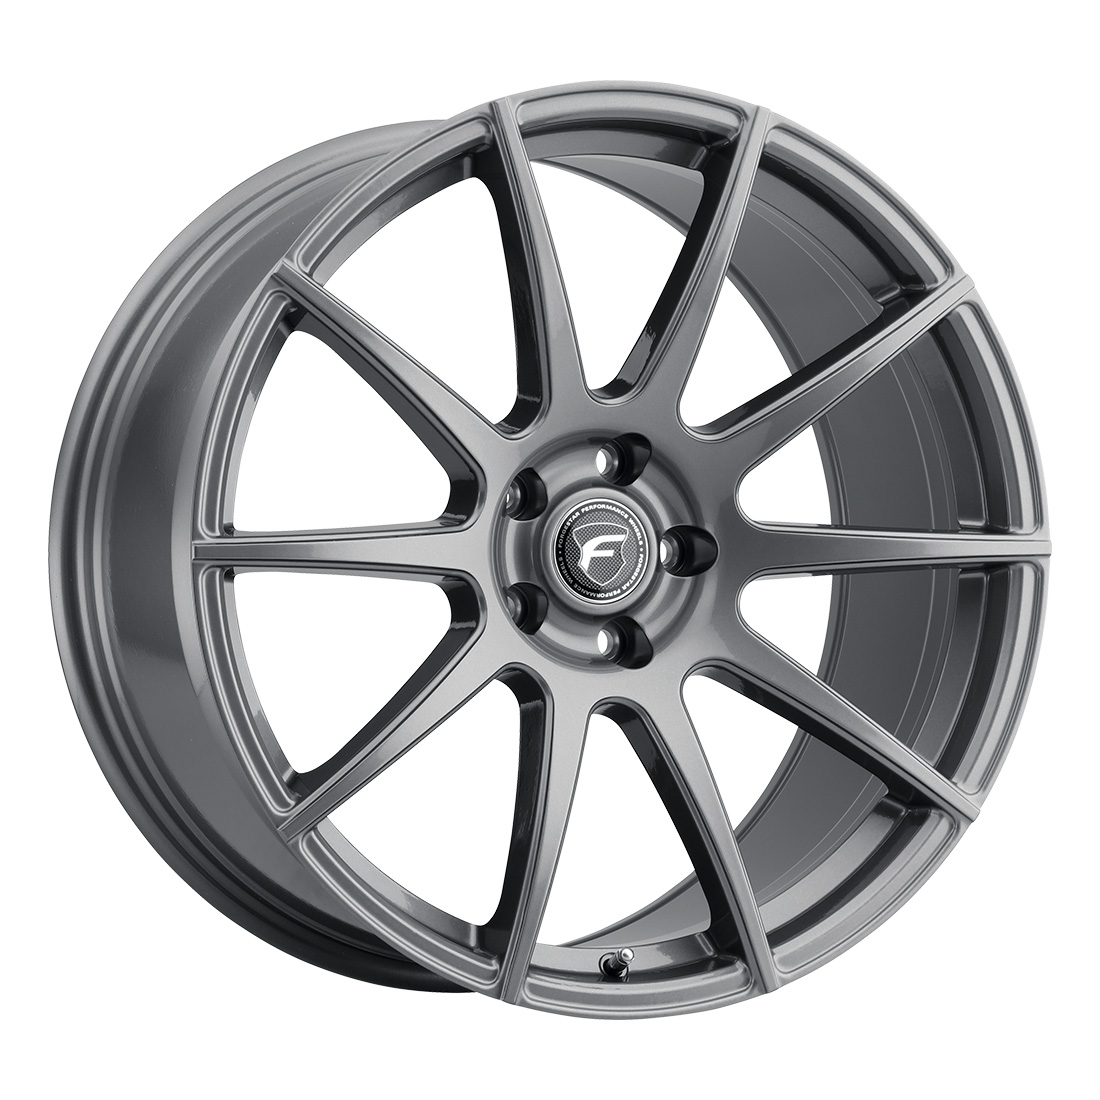 Forgestar CF10 19x9.5 / 5x114.3 BP / ET29 / 6.4in BS Gloss Anthracite Wheel - F20399565P29